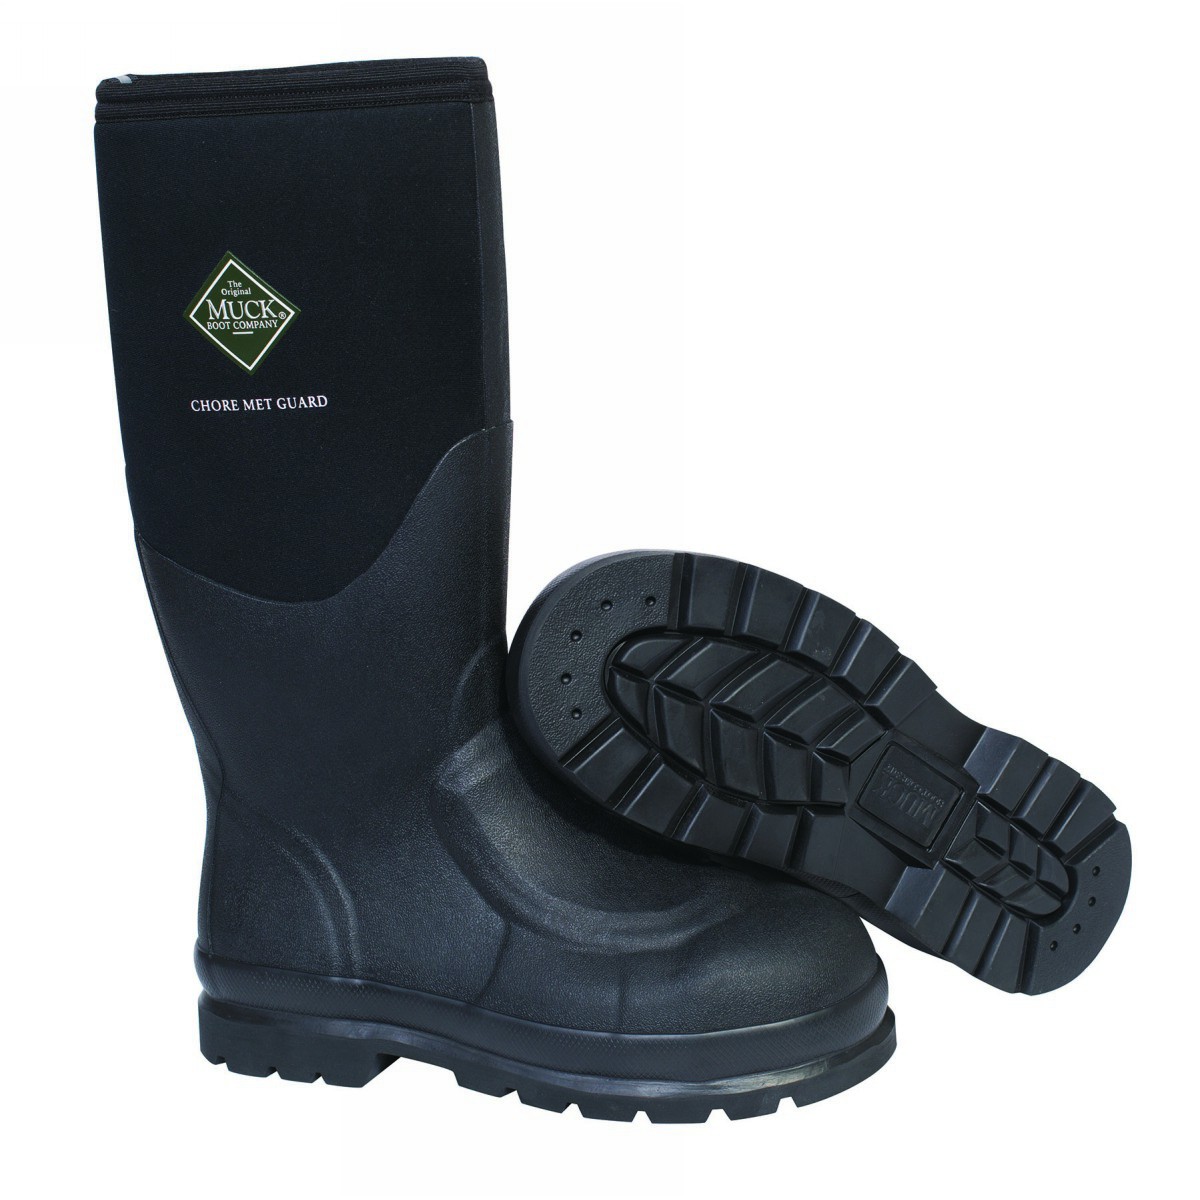 Muck Boot 15” Steel Toe Chore Boot Size 13 